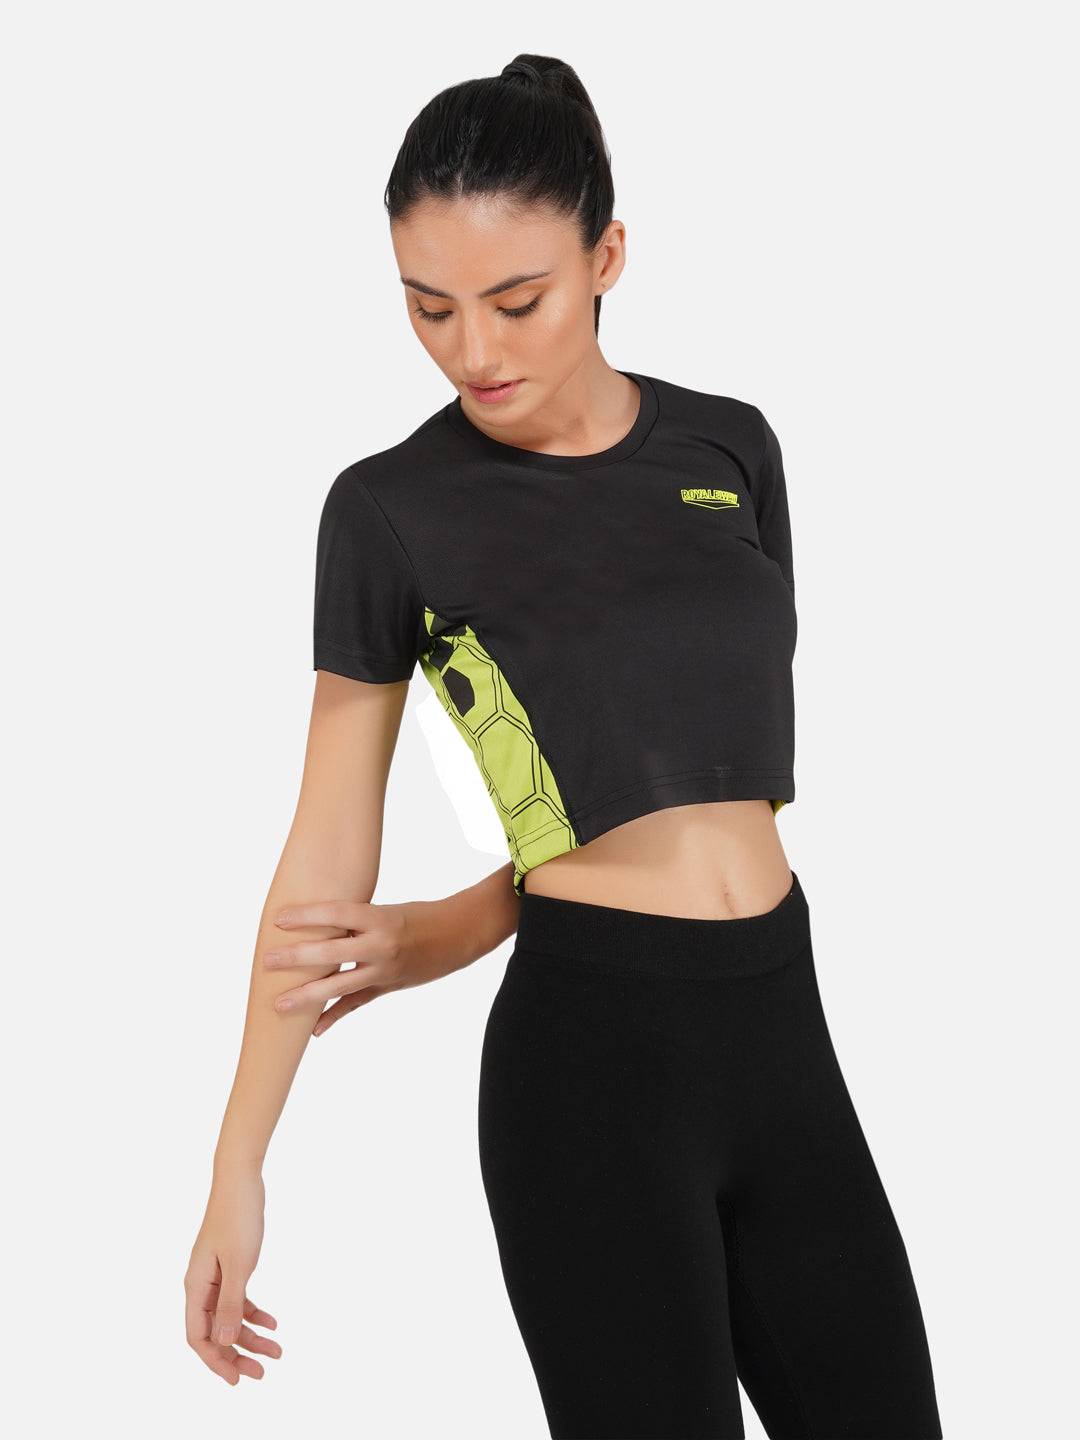 LONG BACK CROP TOP BLACK AND GREEN RWW2026